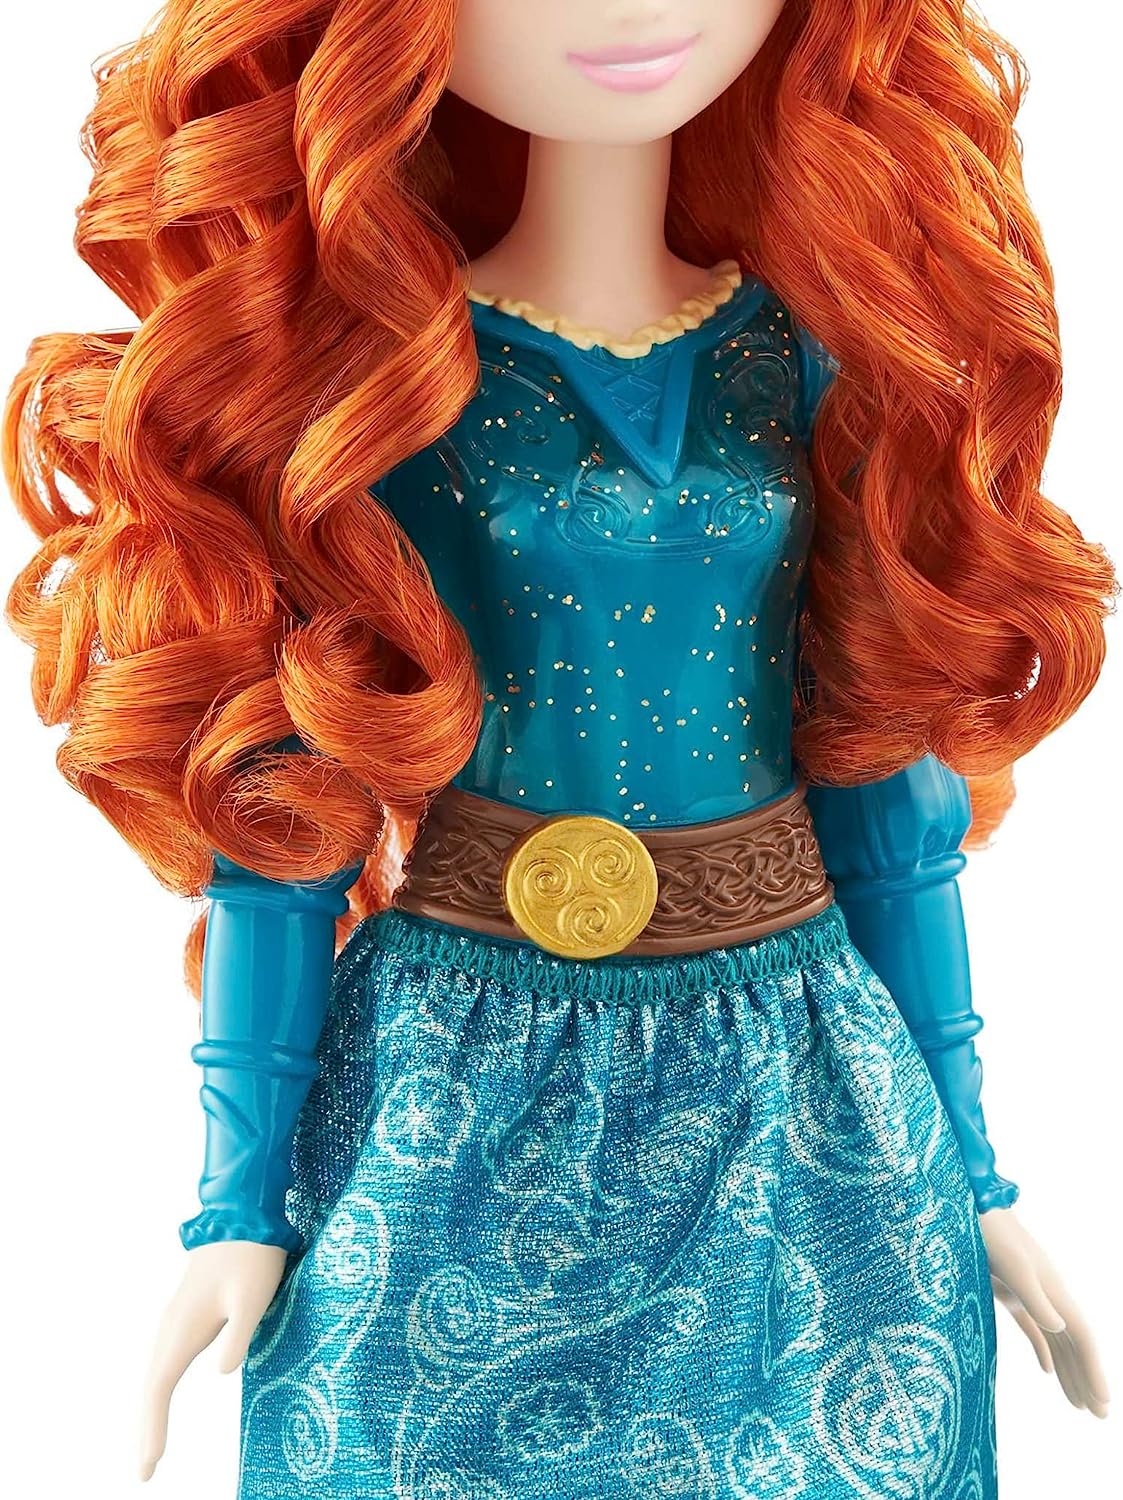 Disney Princess Merida Posable Fashion Doll with Sparkling Clothing and Accessories for Kids Ages 3+